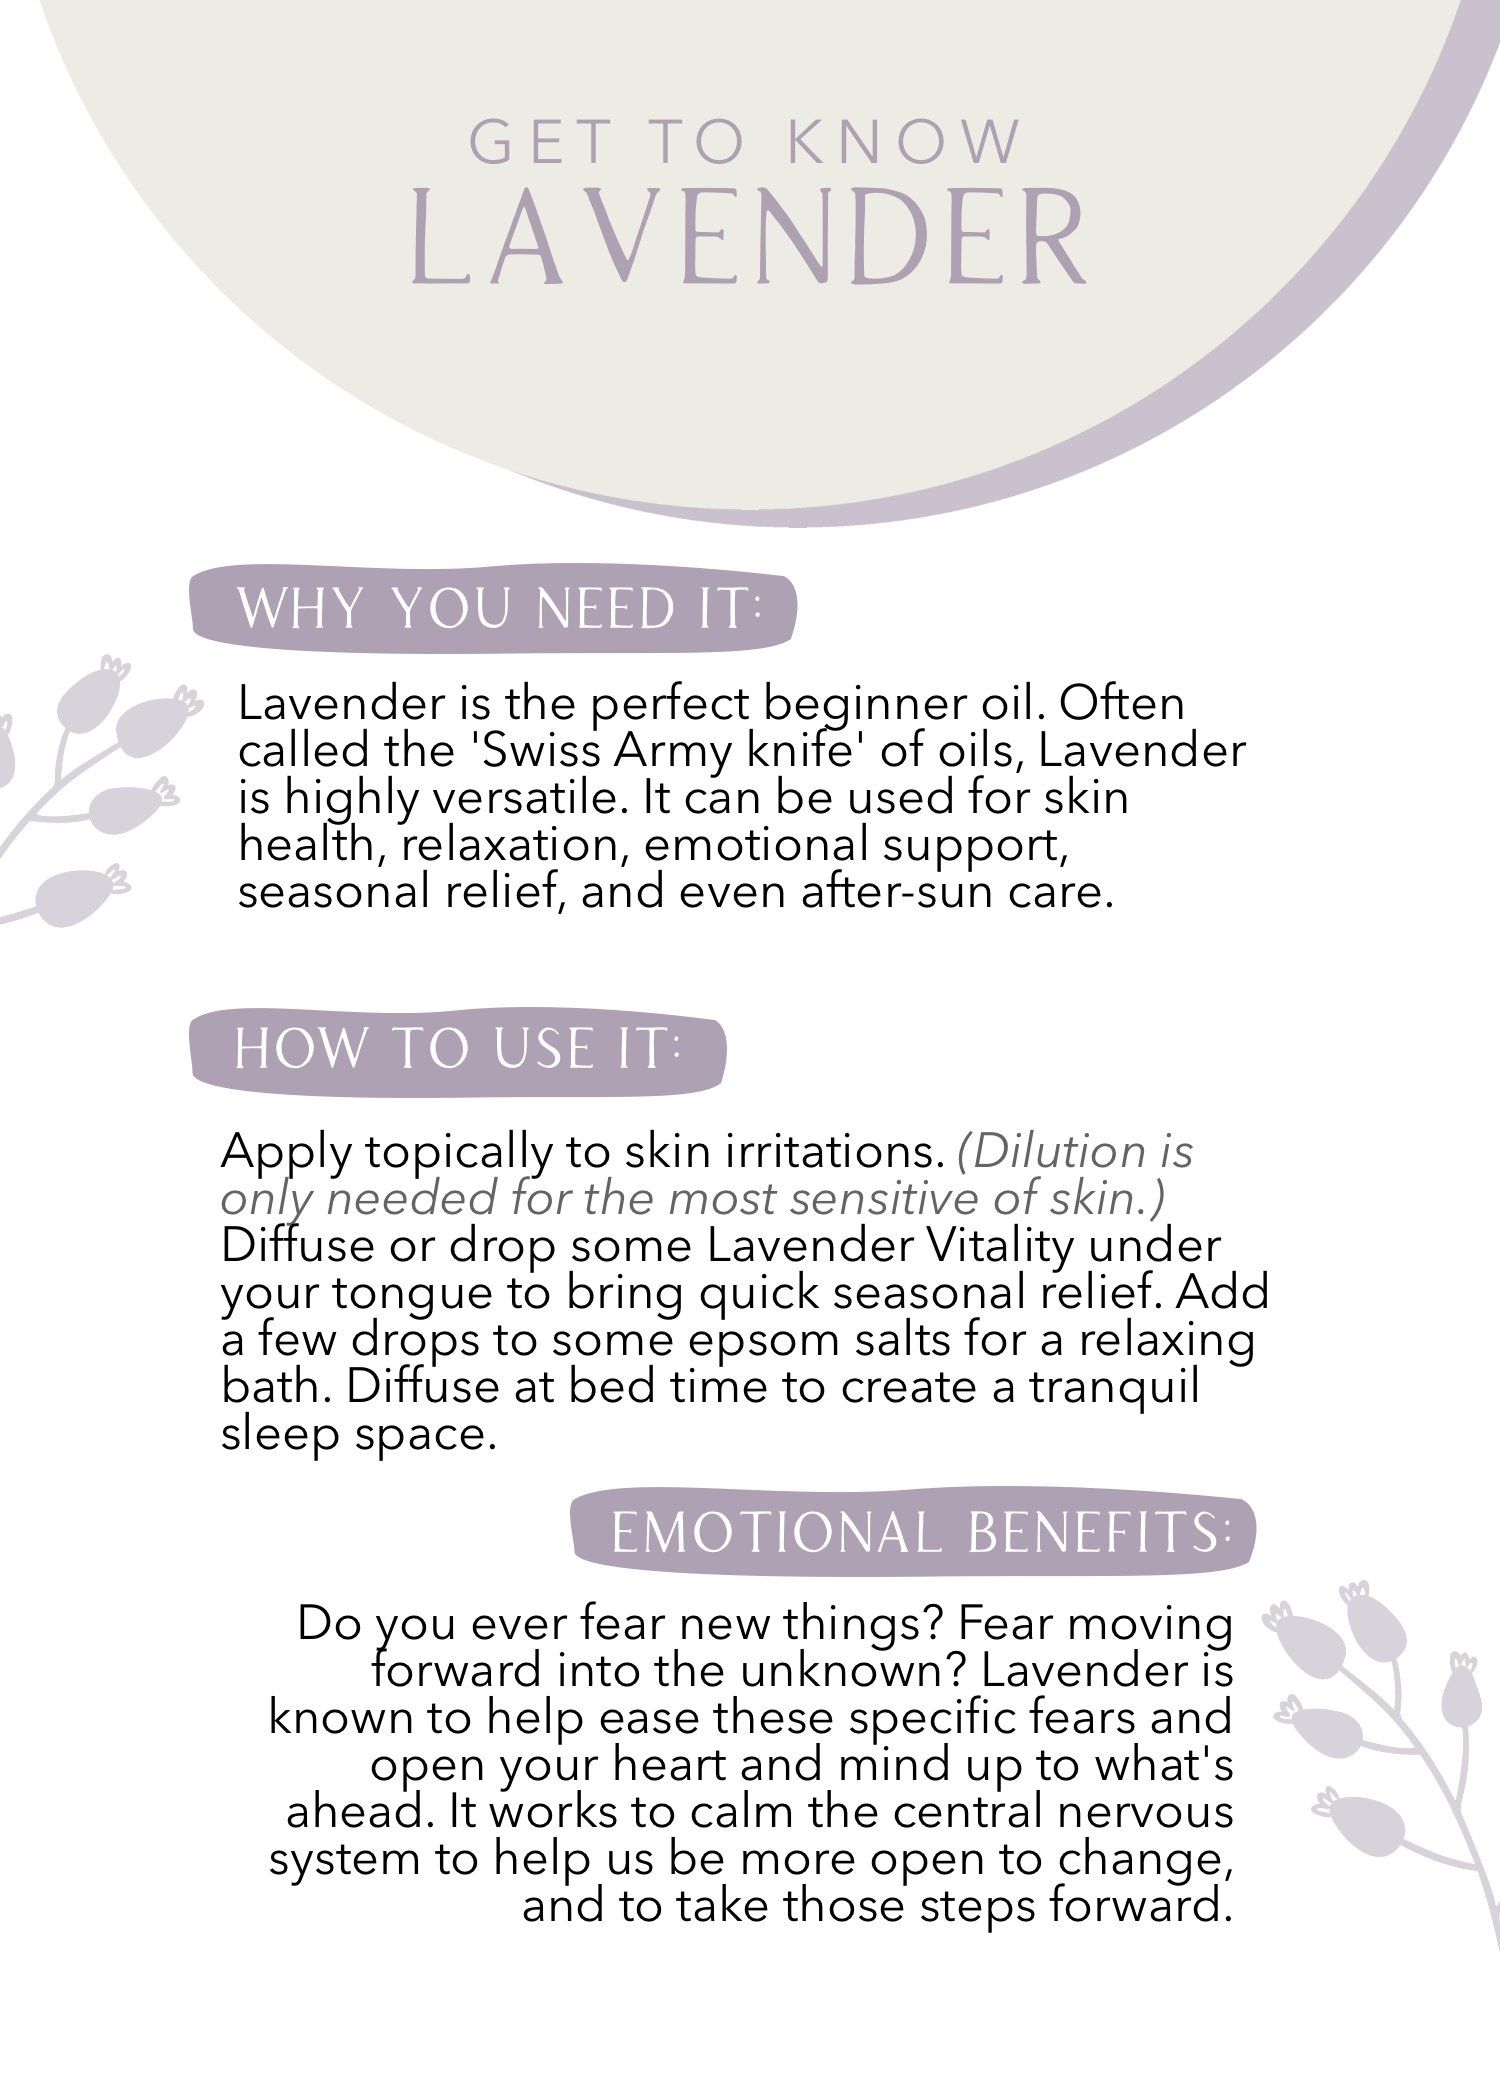 Get to Know Lavender